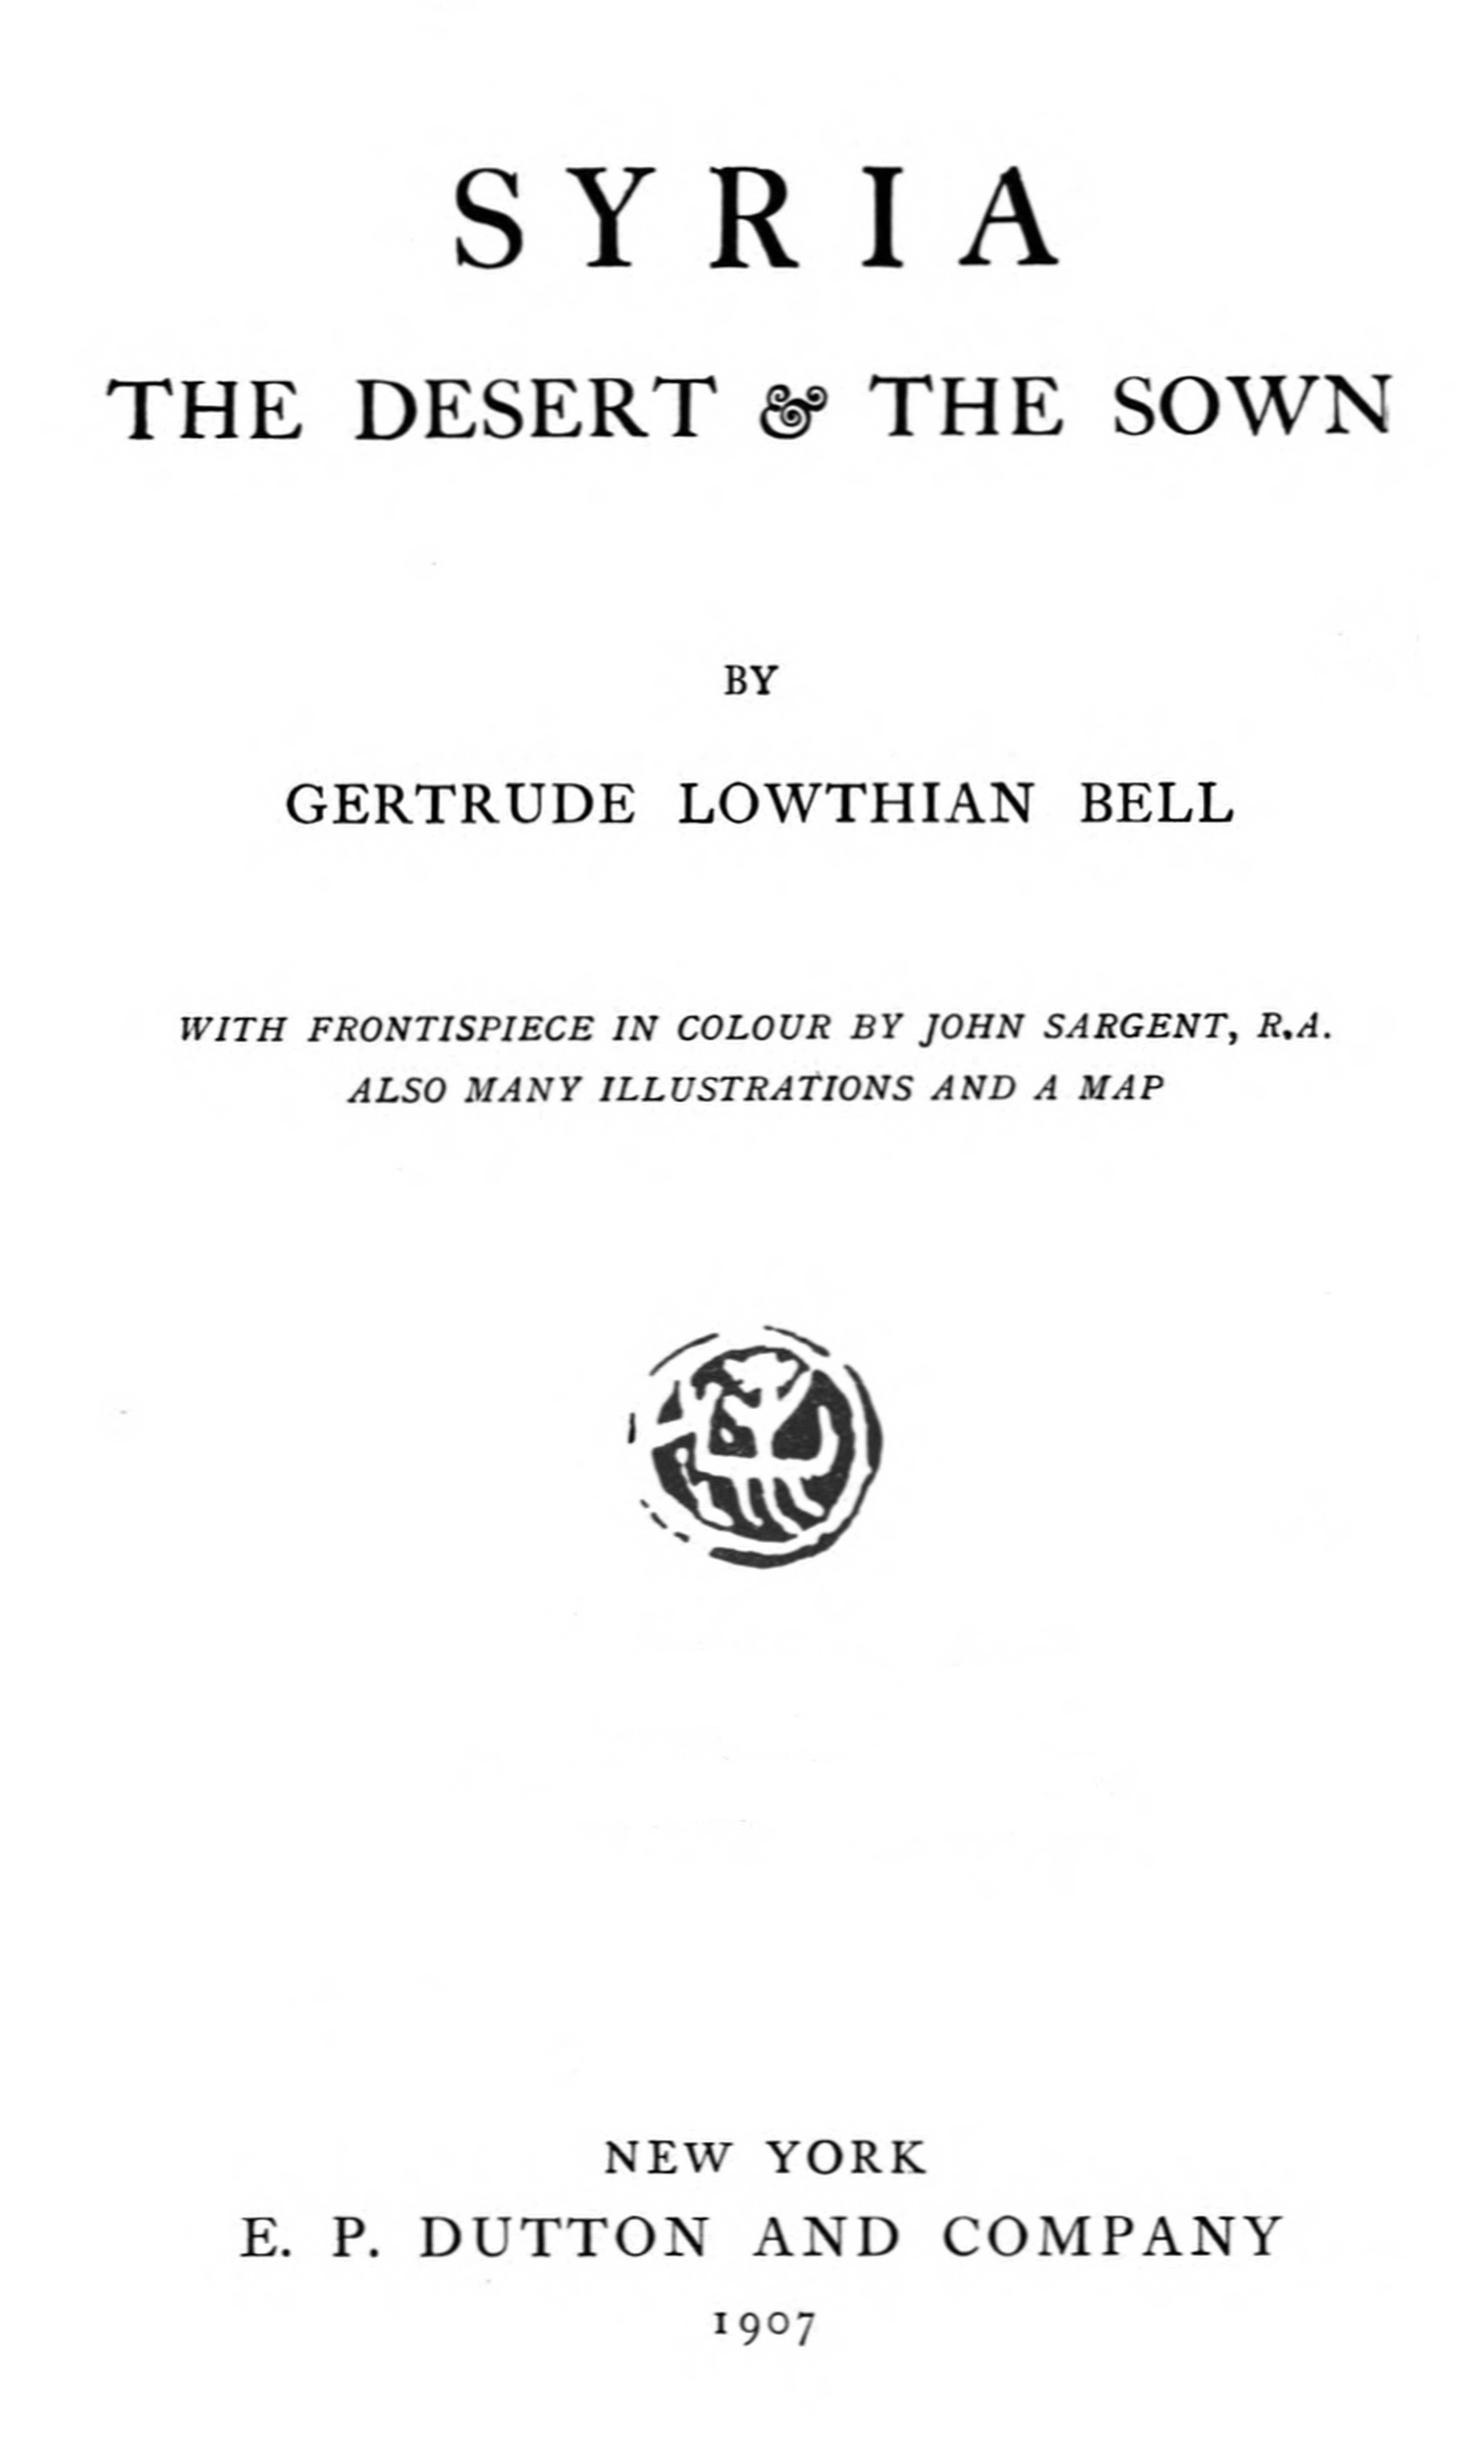 The Project Gutenberg eBook of Syria, The Desert and the Sown, by Gertrude Bell. image picture